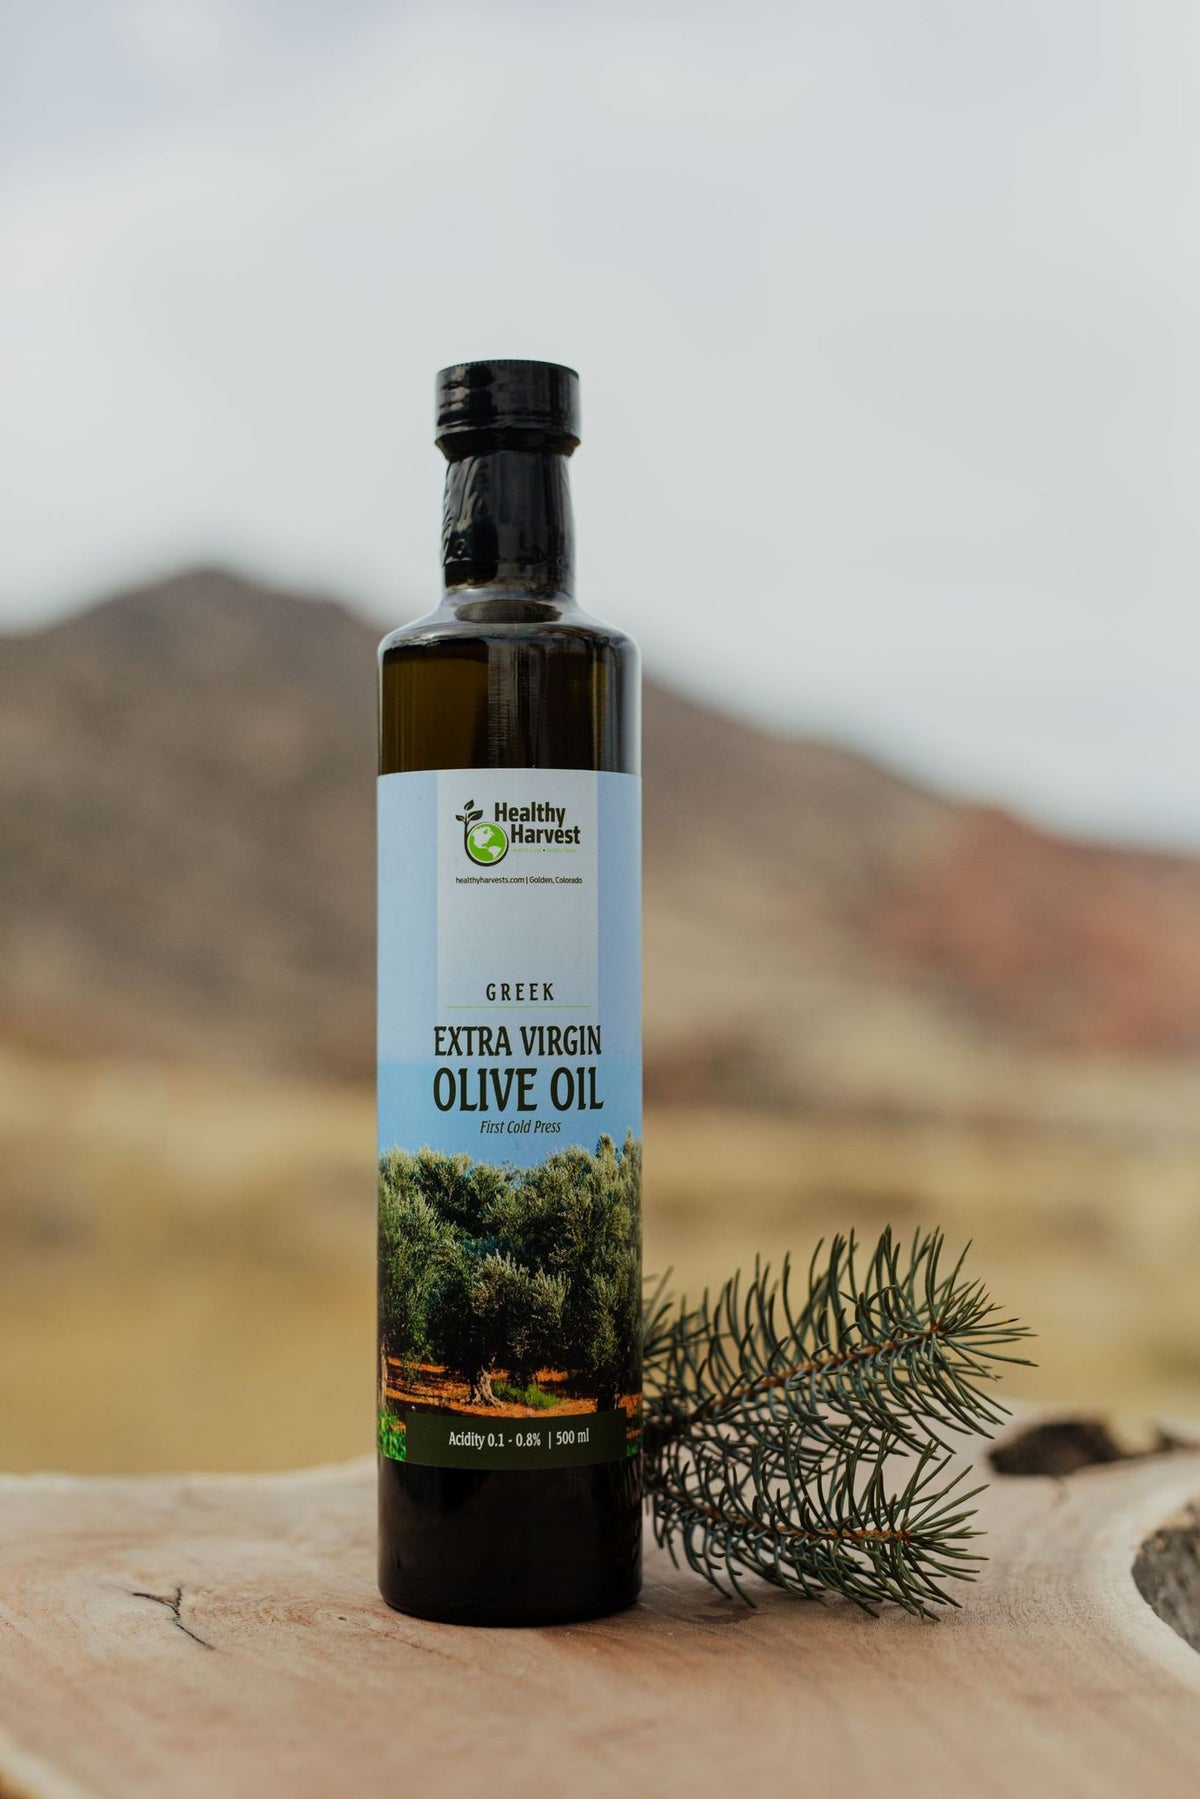 500mL Bottle of Healthy Harvest Extra Virgin Olive Oil photographed outside with a  branch and mountain in background highlighting the bright blue sky and Greek olive farm on the label